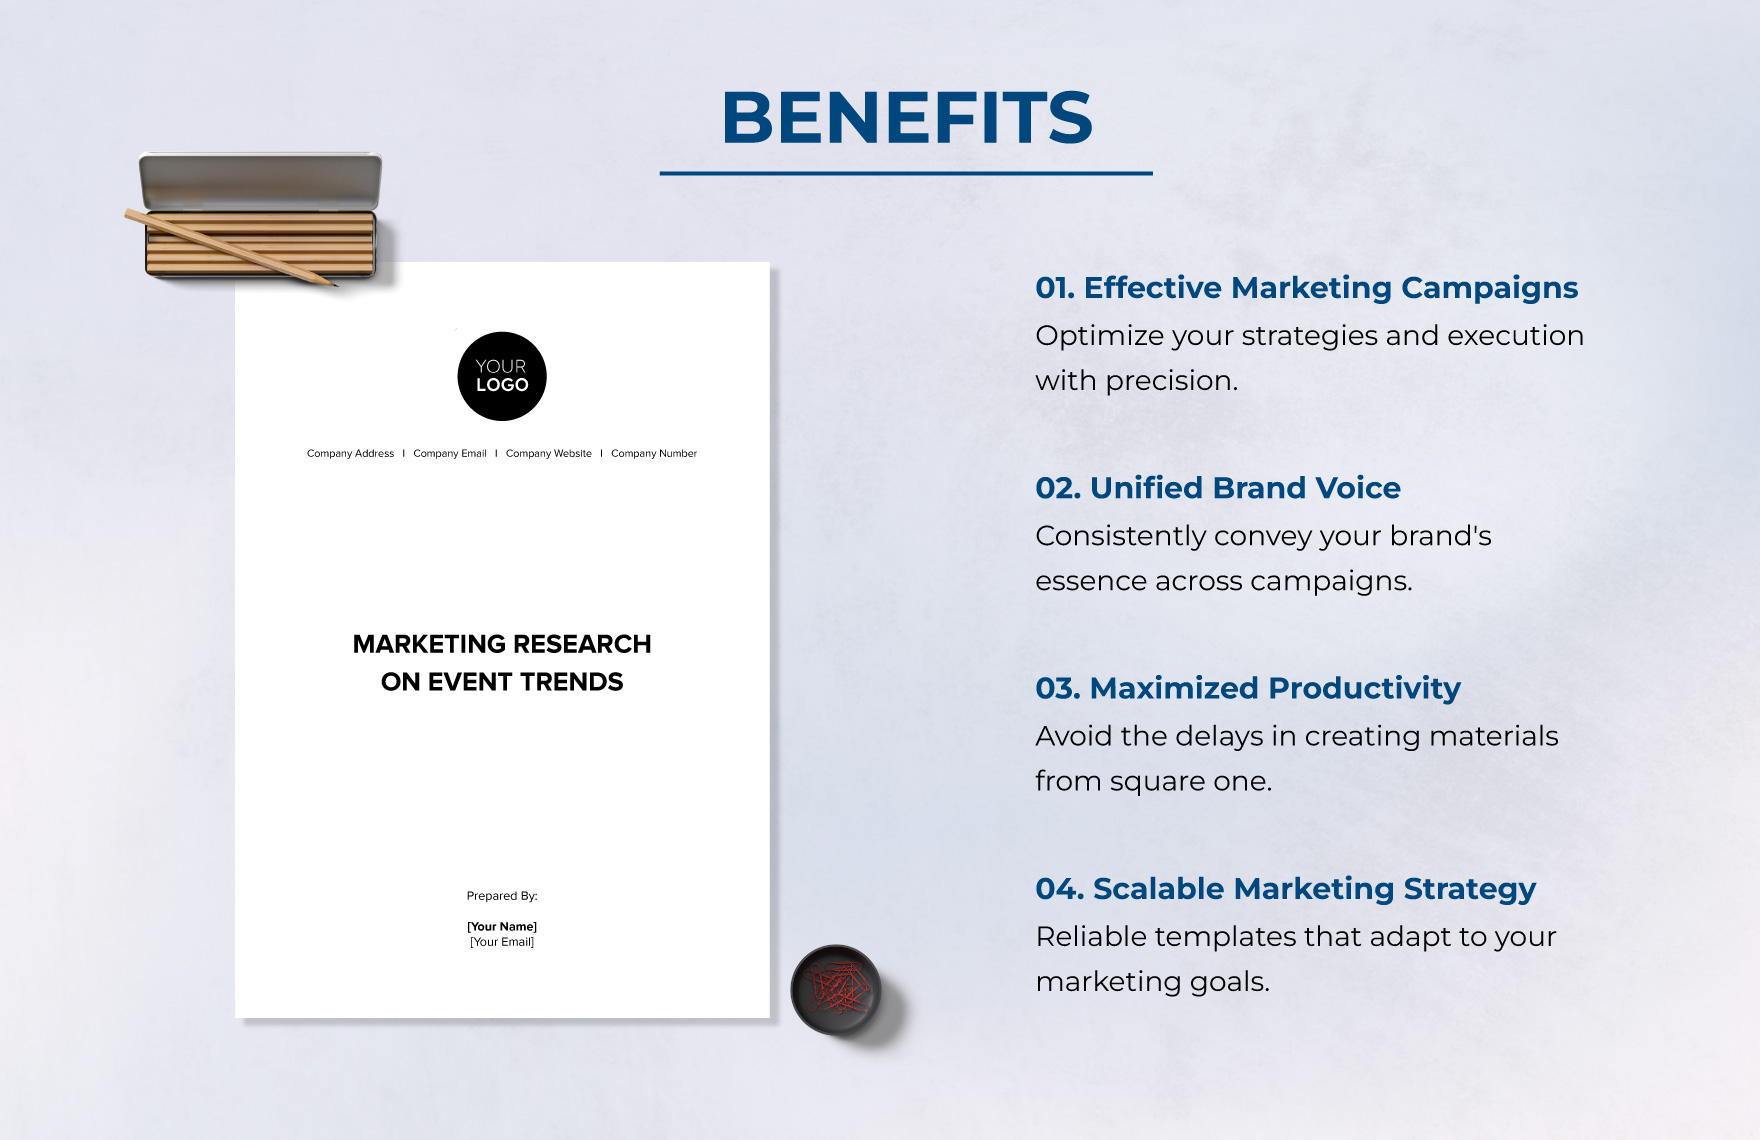 Marketing Research on Event Trends Template